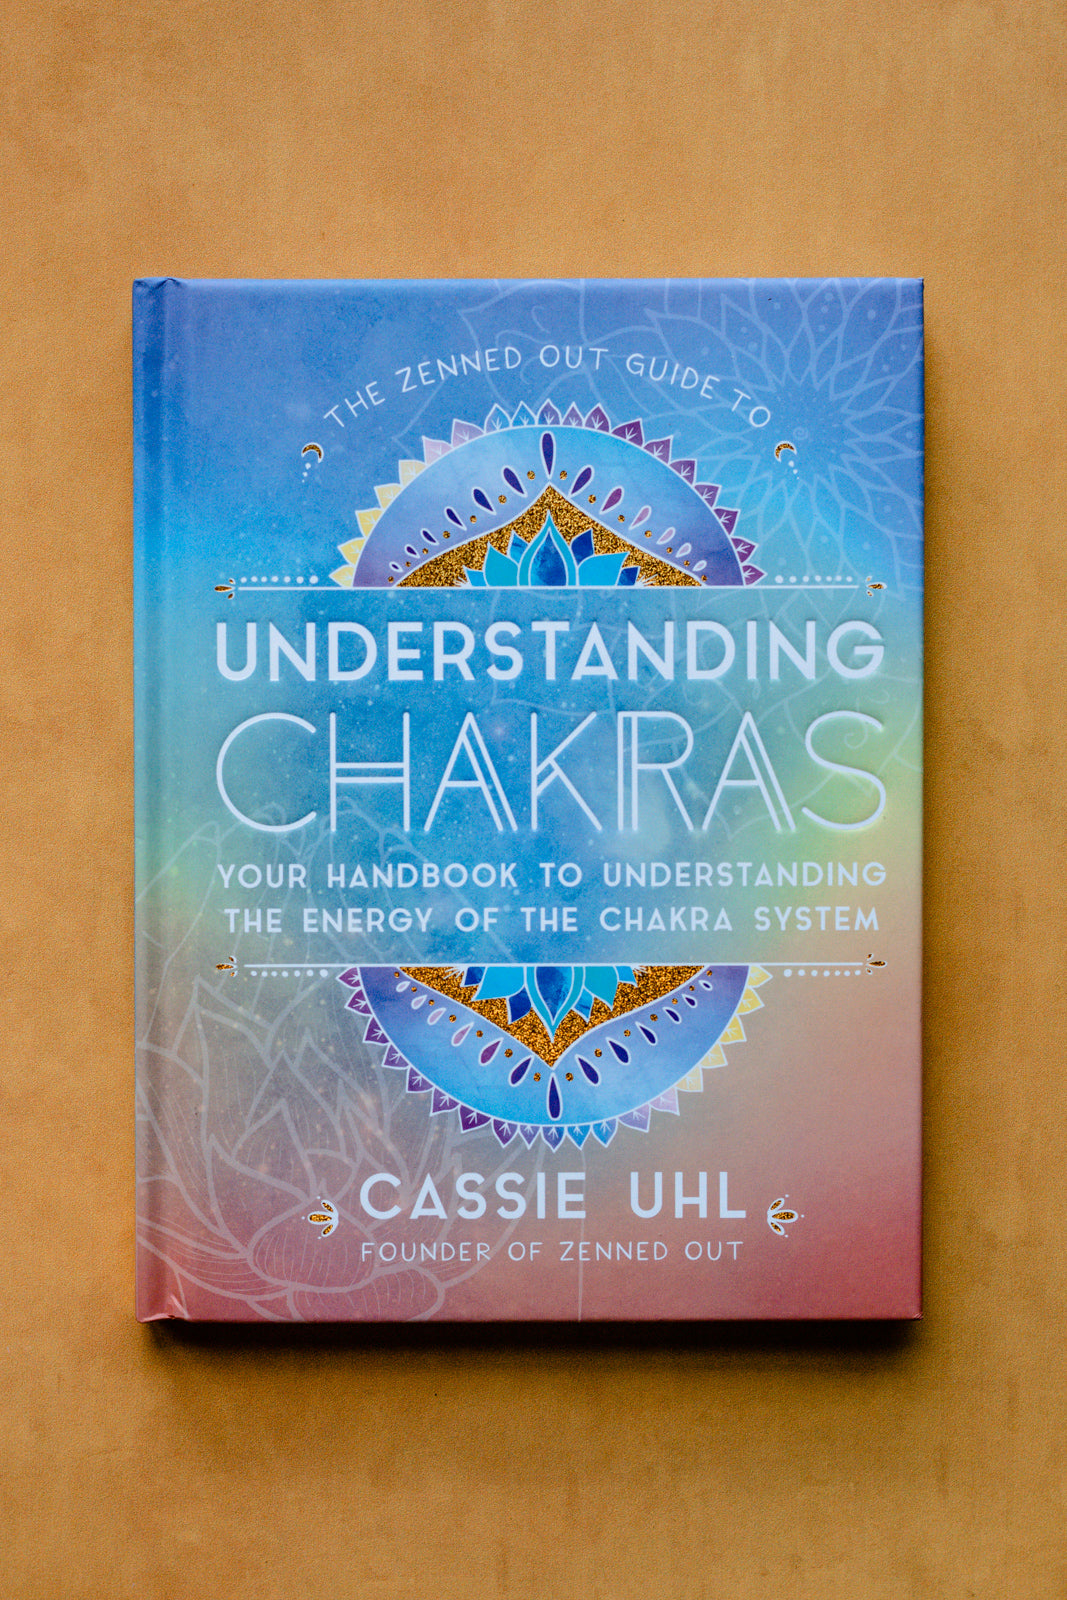 The Zenned Out Guide to Chakras